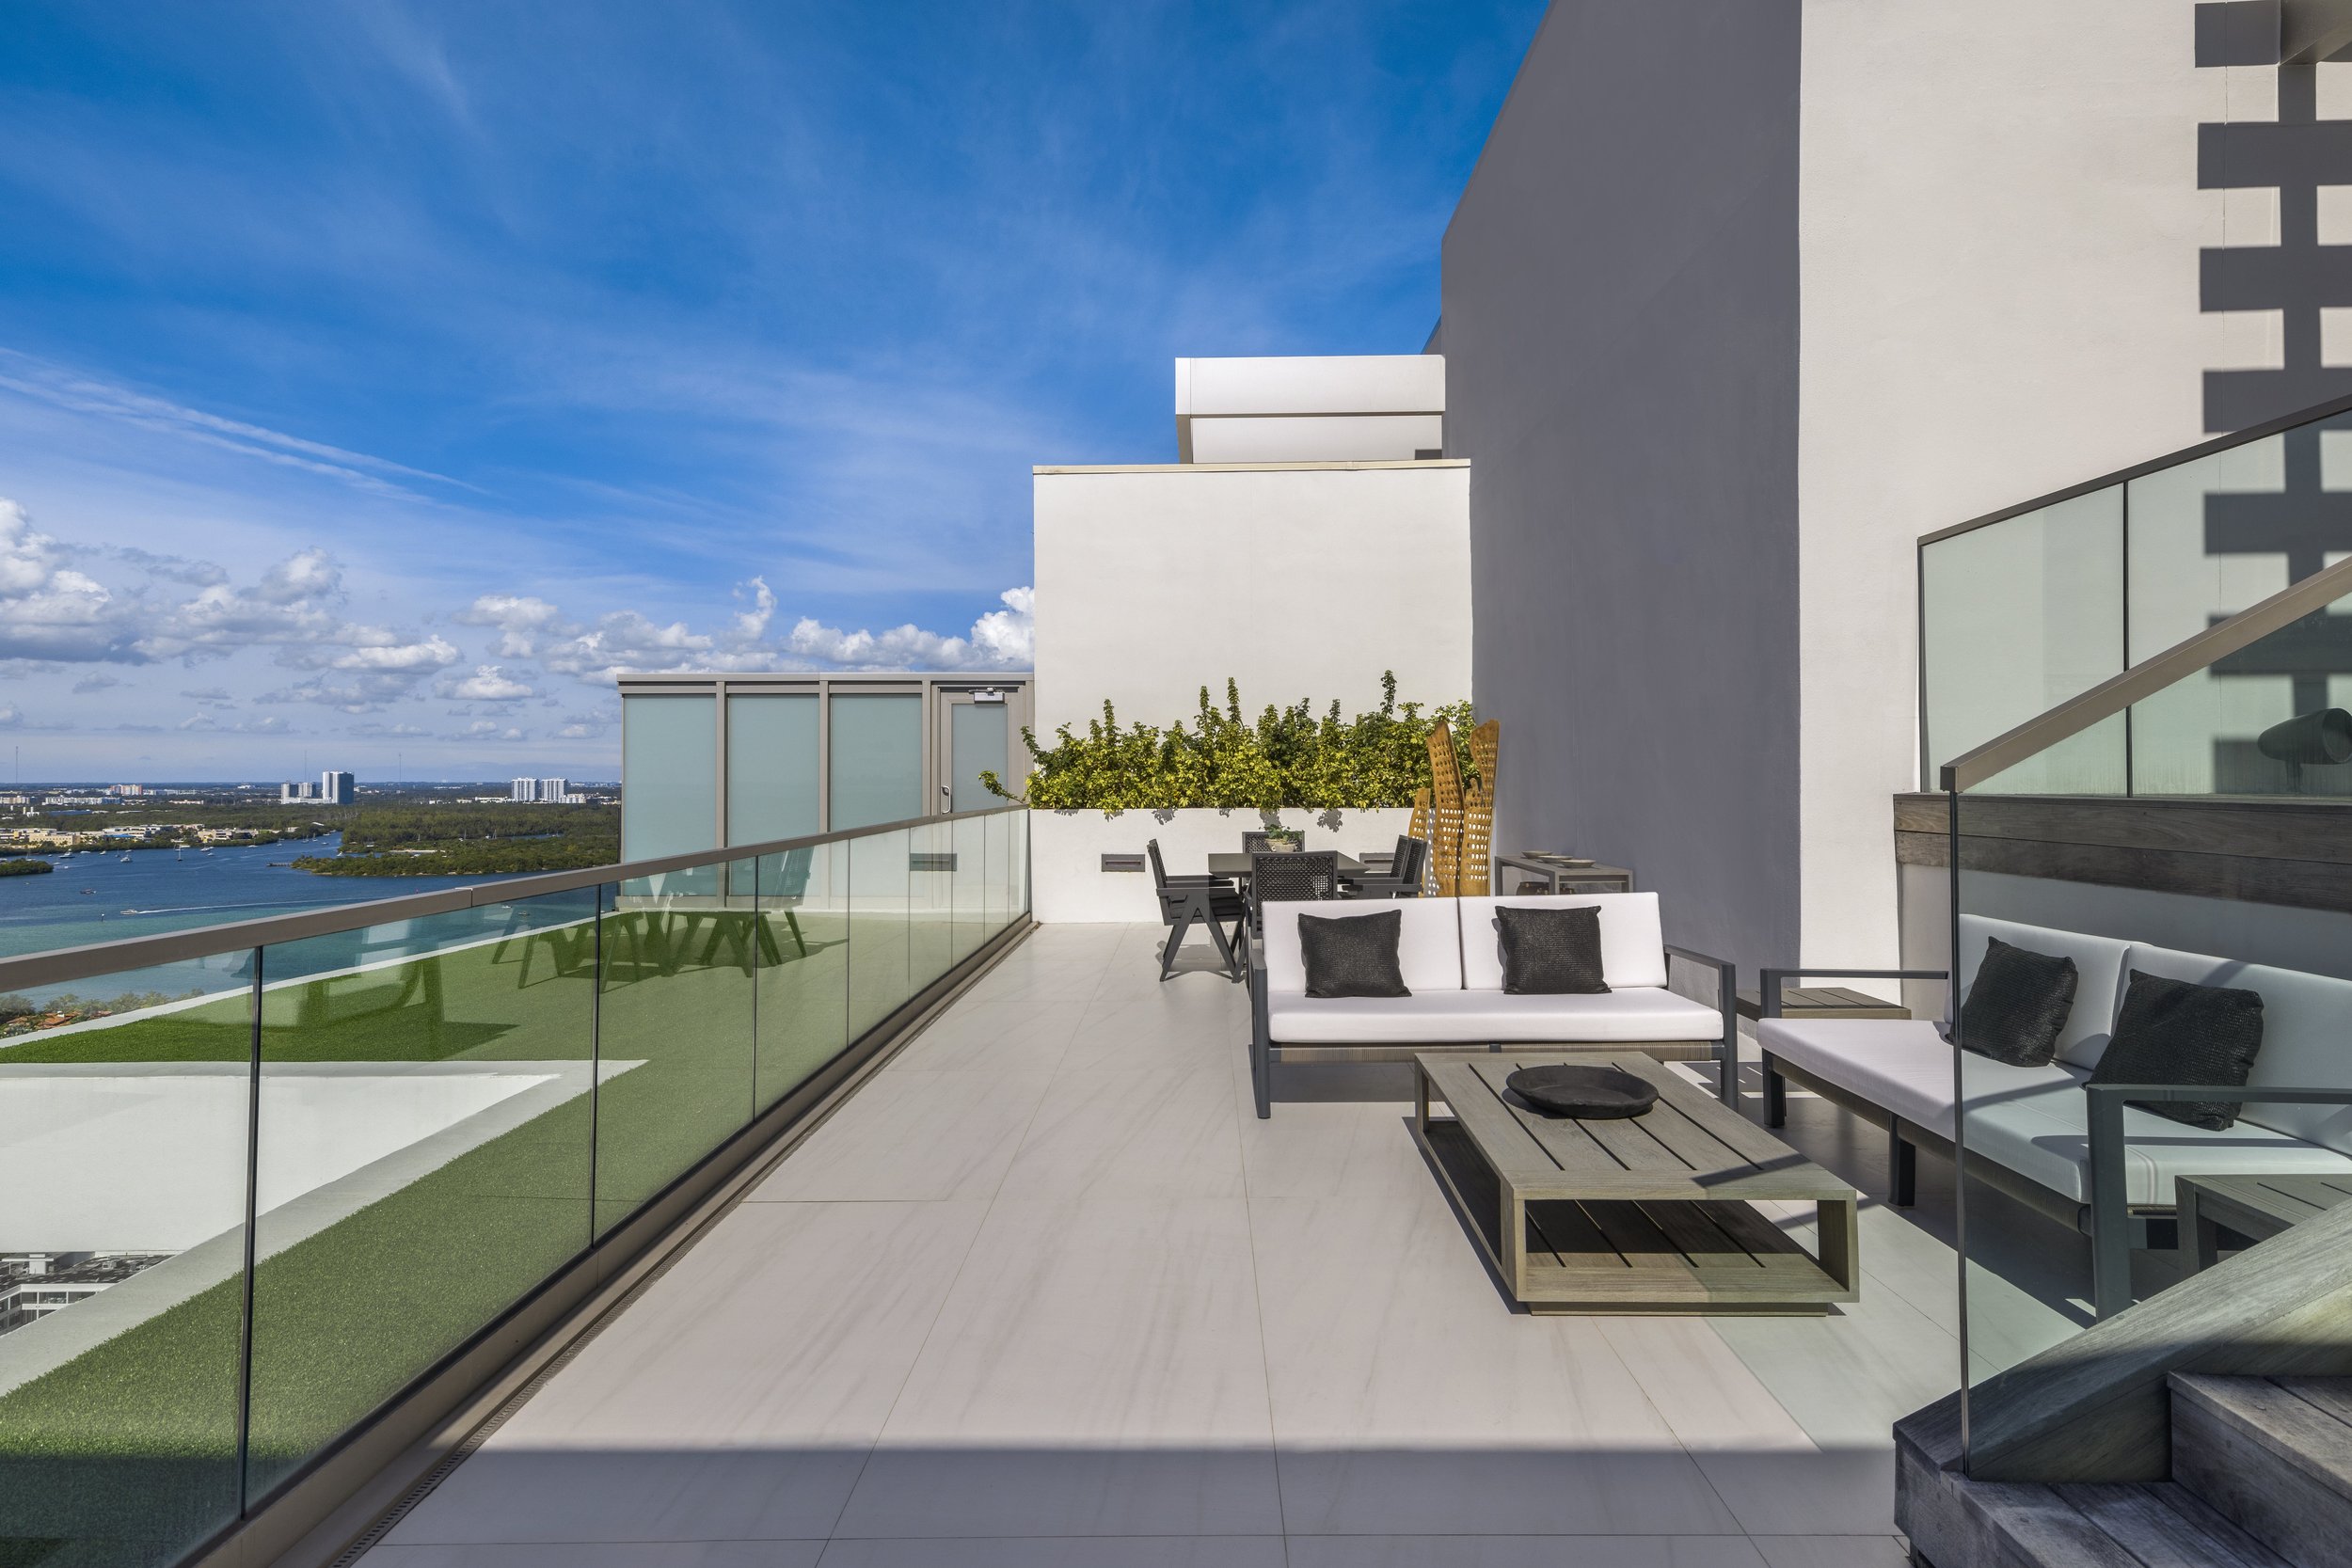 Step Inside This Two-Story Crown Jewel Penthouse At Oceana Bal Harbour Asking $25 Million 28.jpg